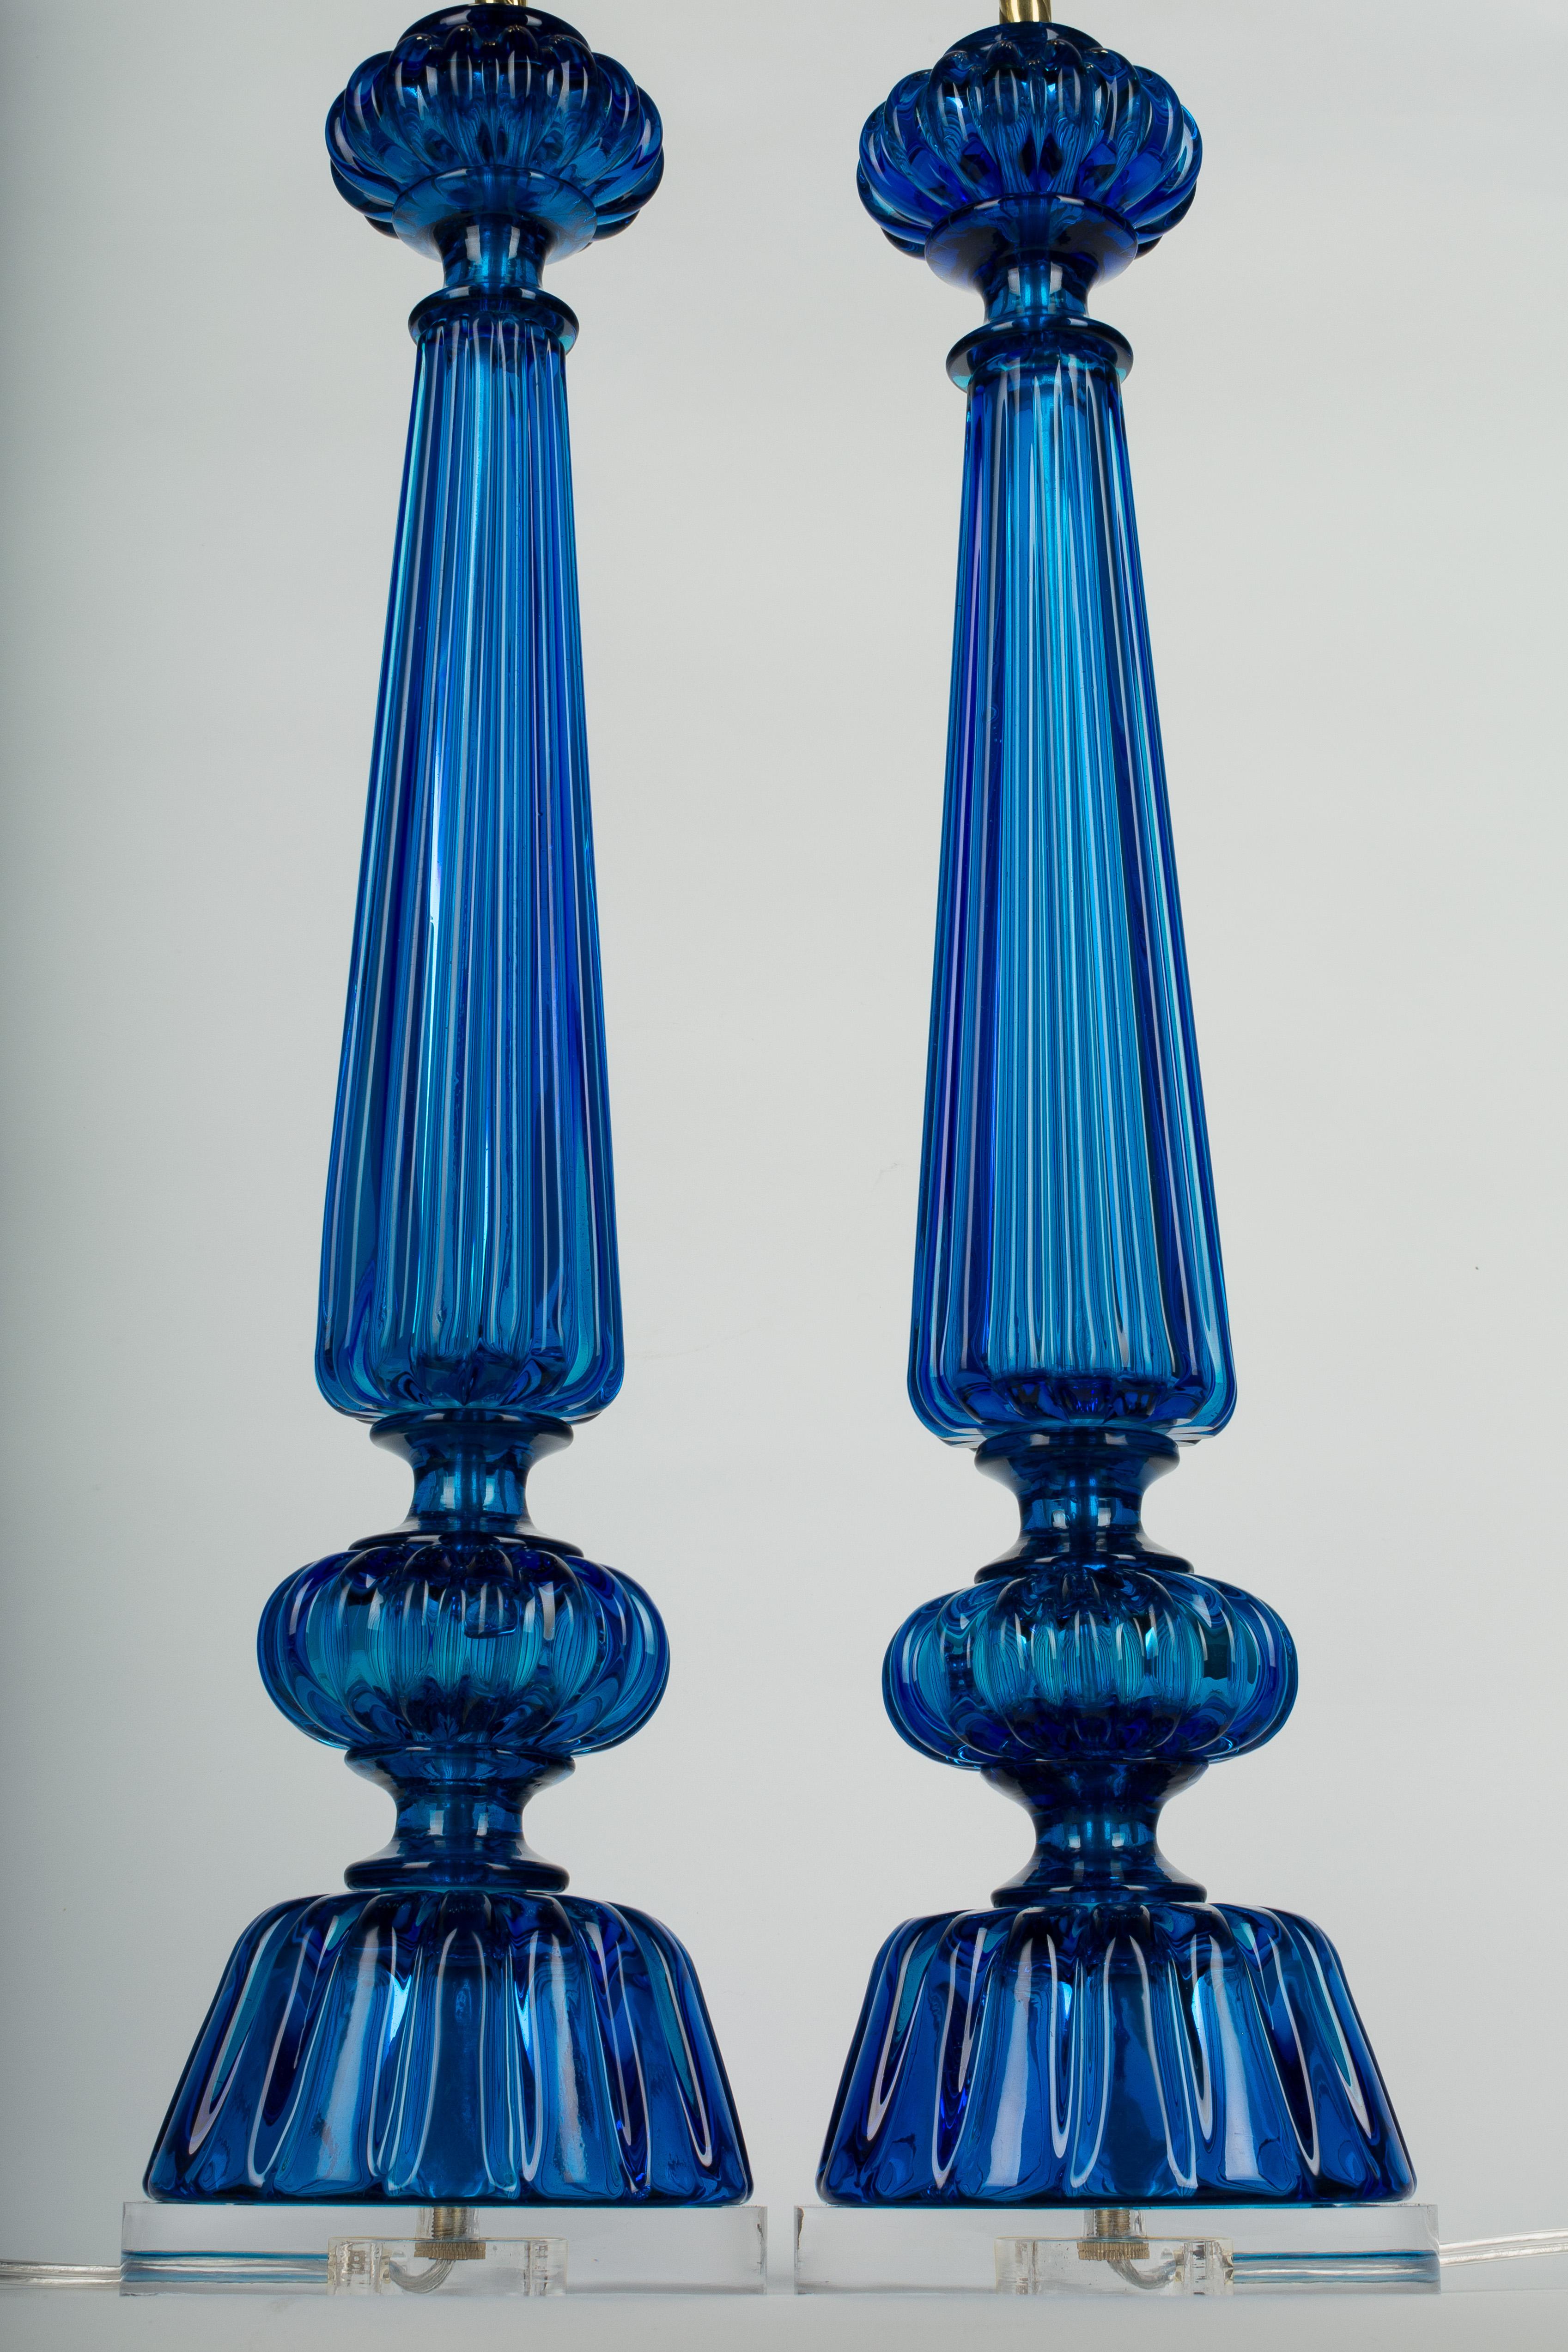 A pair of tall Mid-Century Modern Murano glass lamps by Seguso comprised of four cobalt blue glass parts. Original polished brass fittings. Rewired with new 3-way sockets and new Lucite bases.